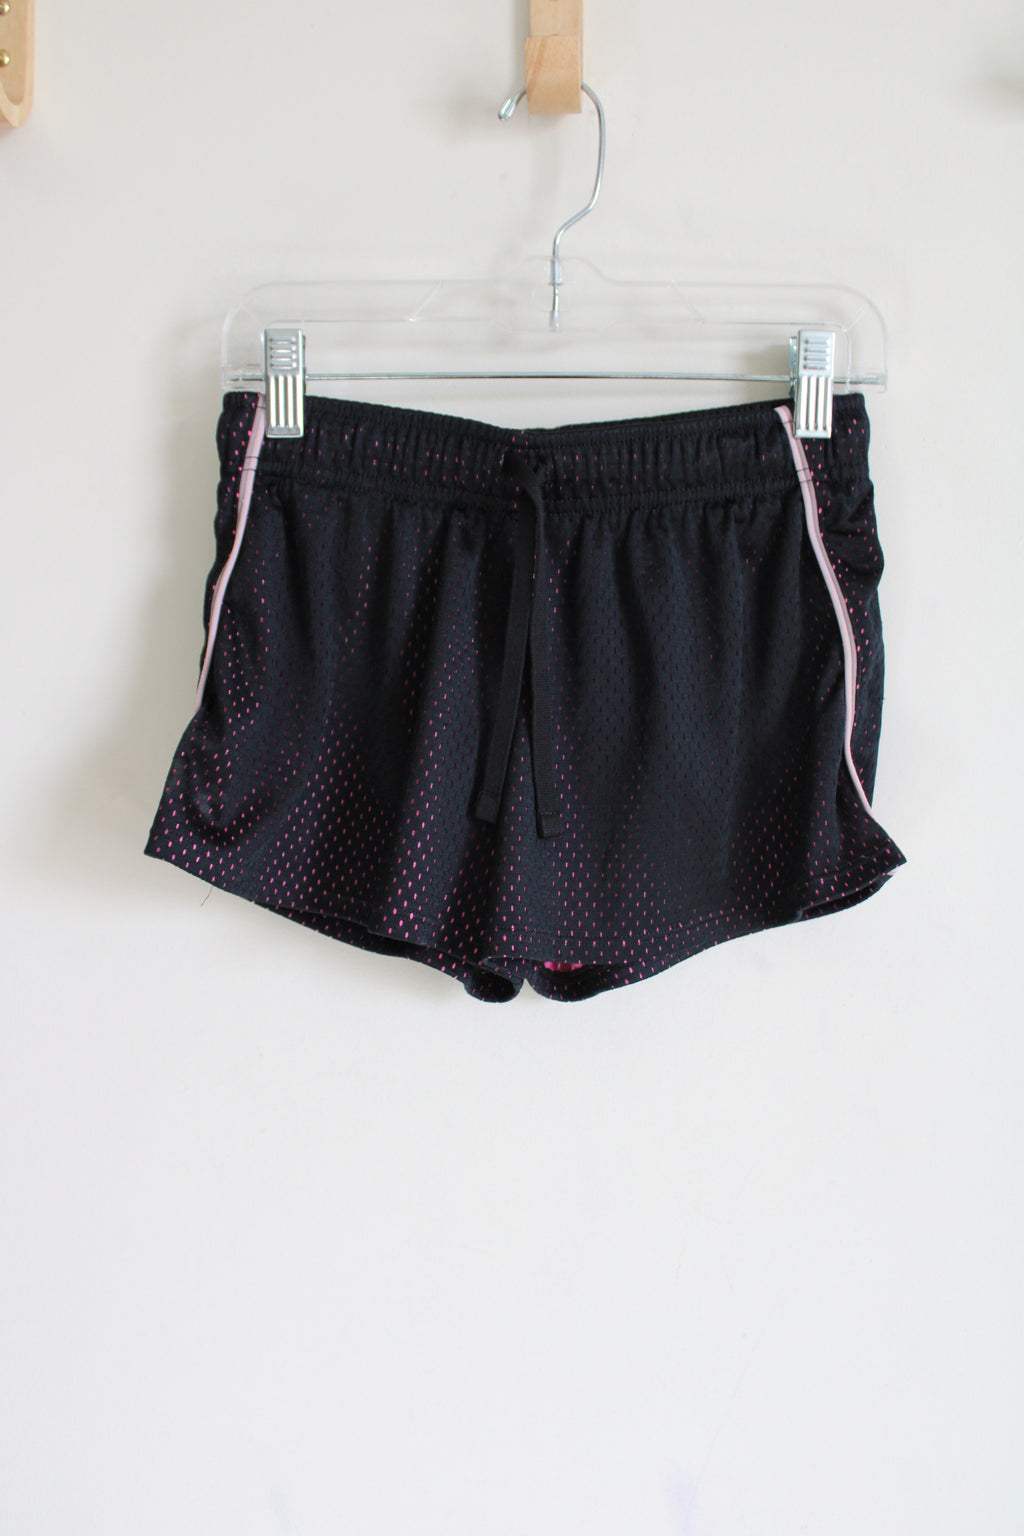 Under Armour Loose Fit Black & Pink Shorts | Youth M (10/12)